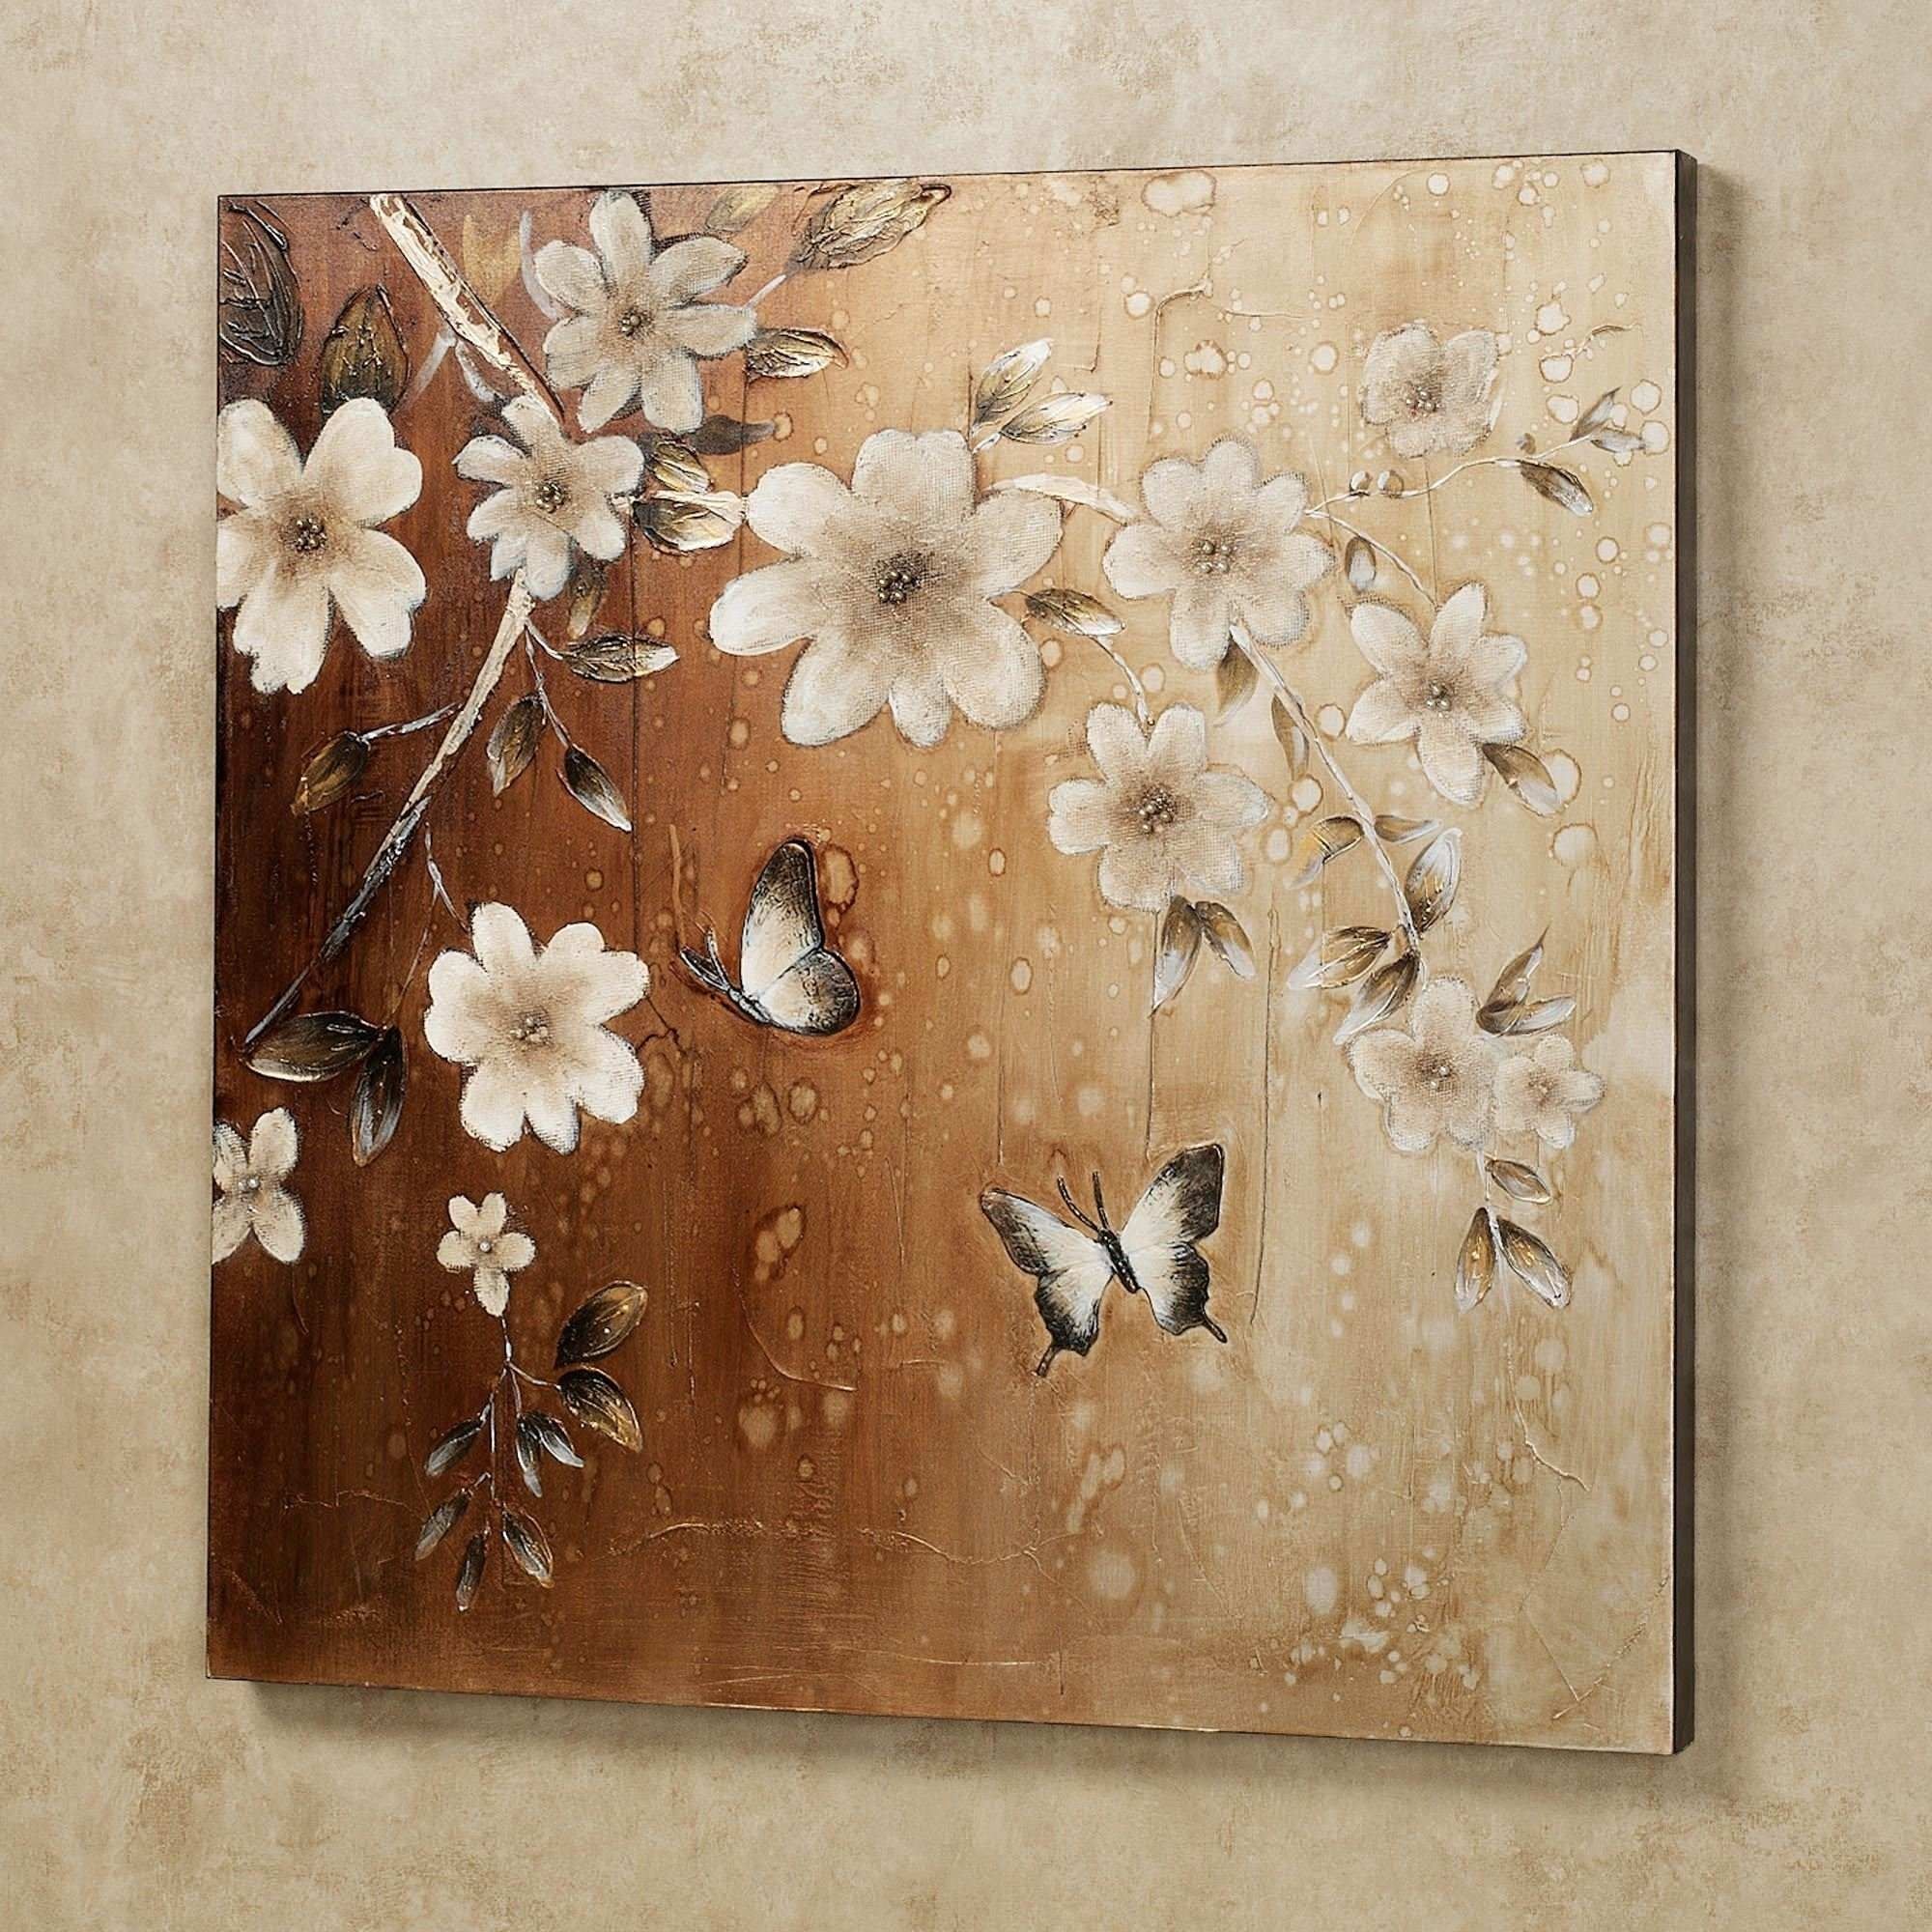 Floral Wall Art Awesome Midday Sun Butterfly Floral Canvas Wall Art Intended For Floral Canvas Wall Art (View 5 of 20)